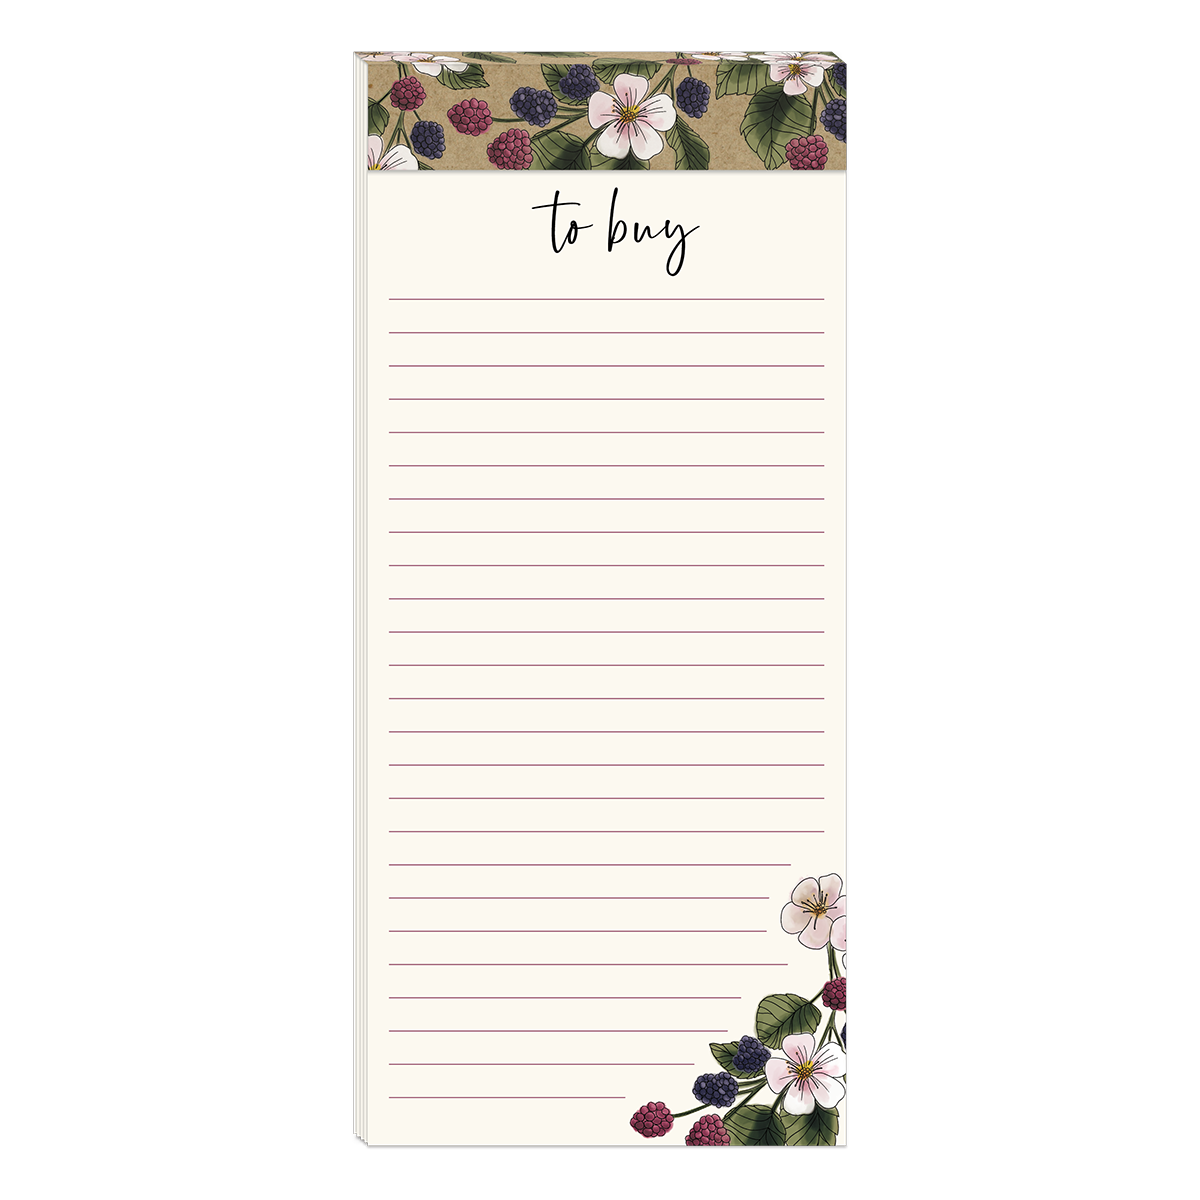 Orchard Blackberries Magnetic List Pad Product